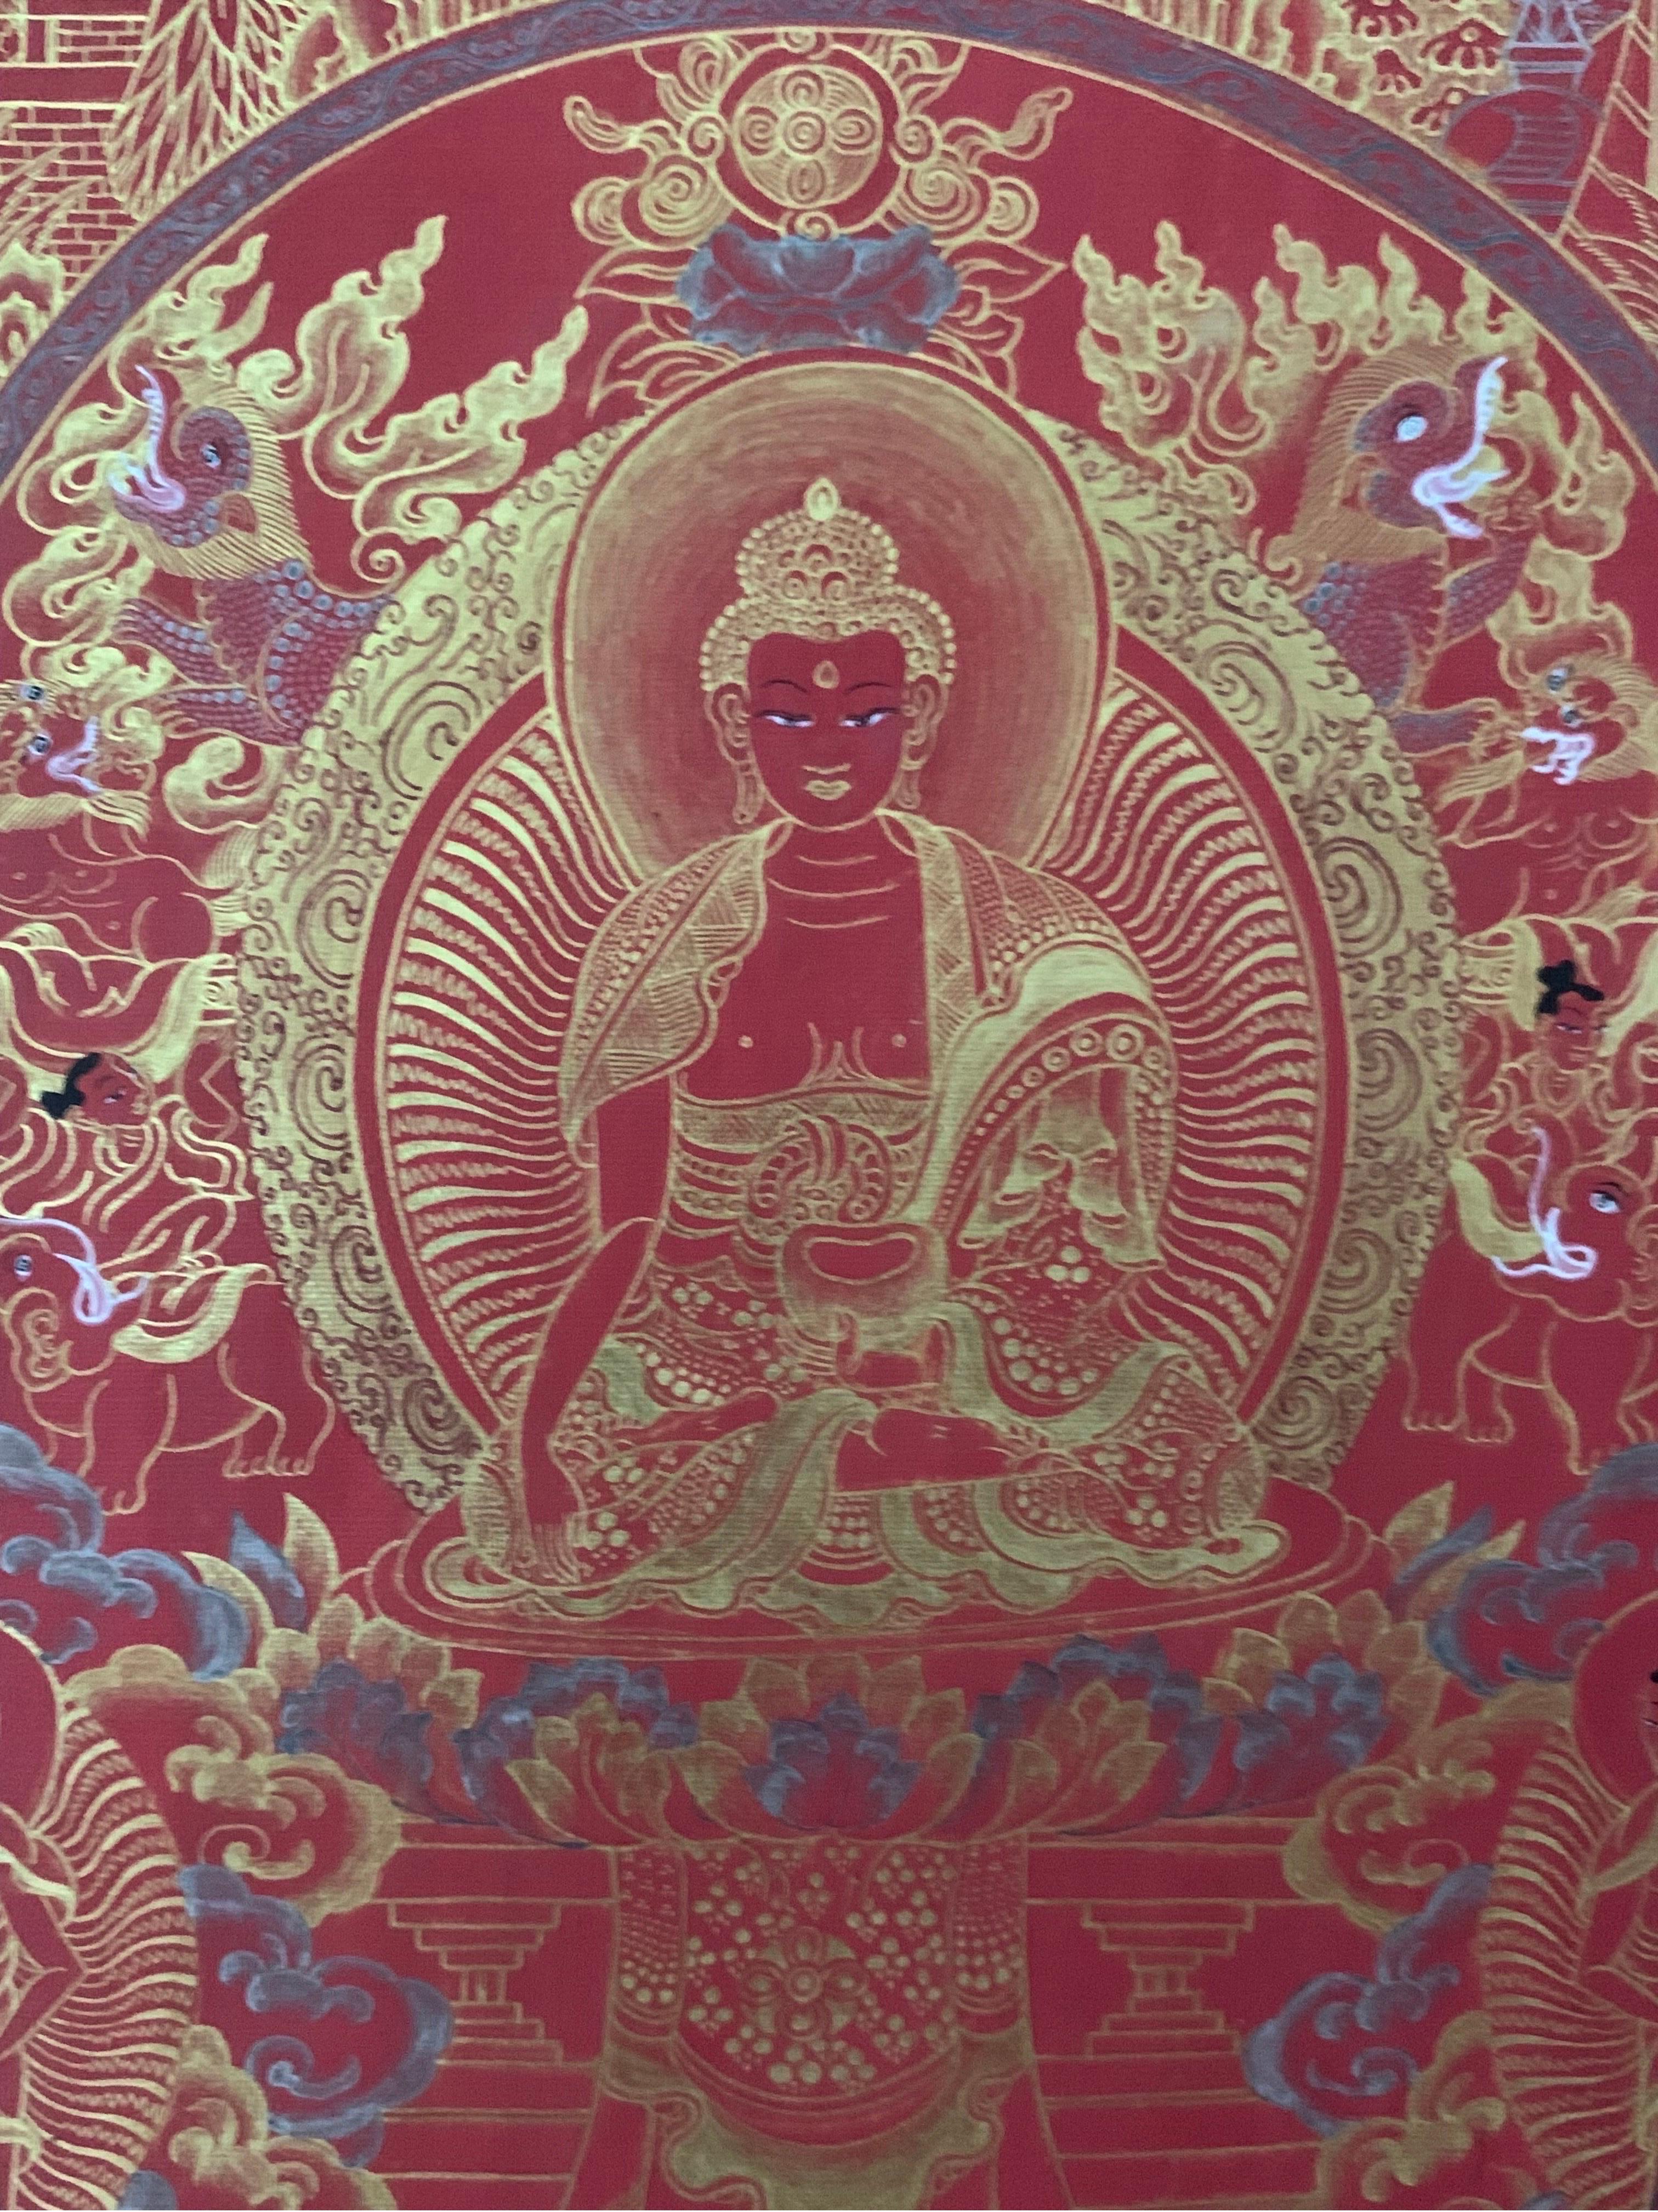 Unframed Hand Painted Life History of Buddha Thangka on Canvas with 24K Gold For Sale 12